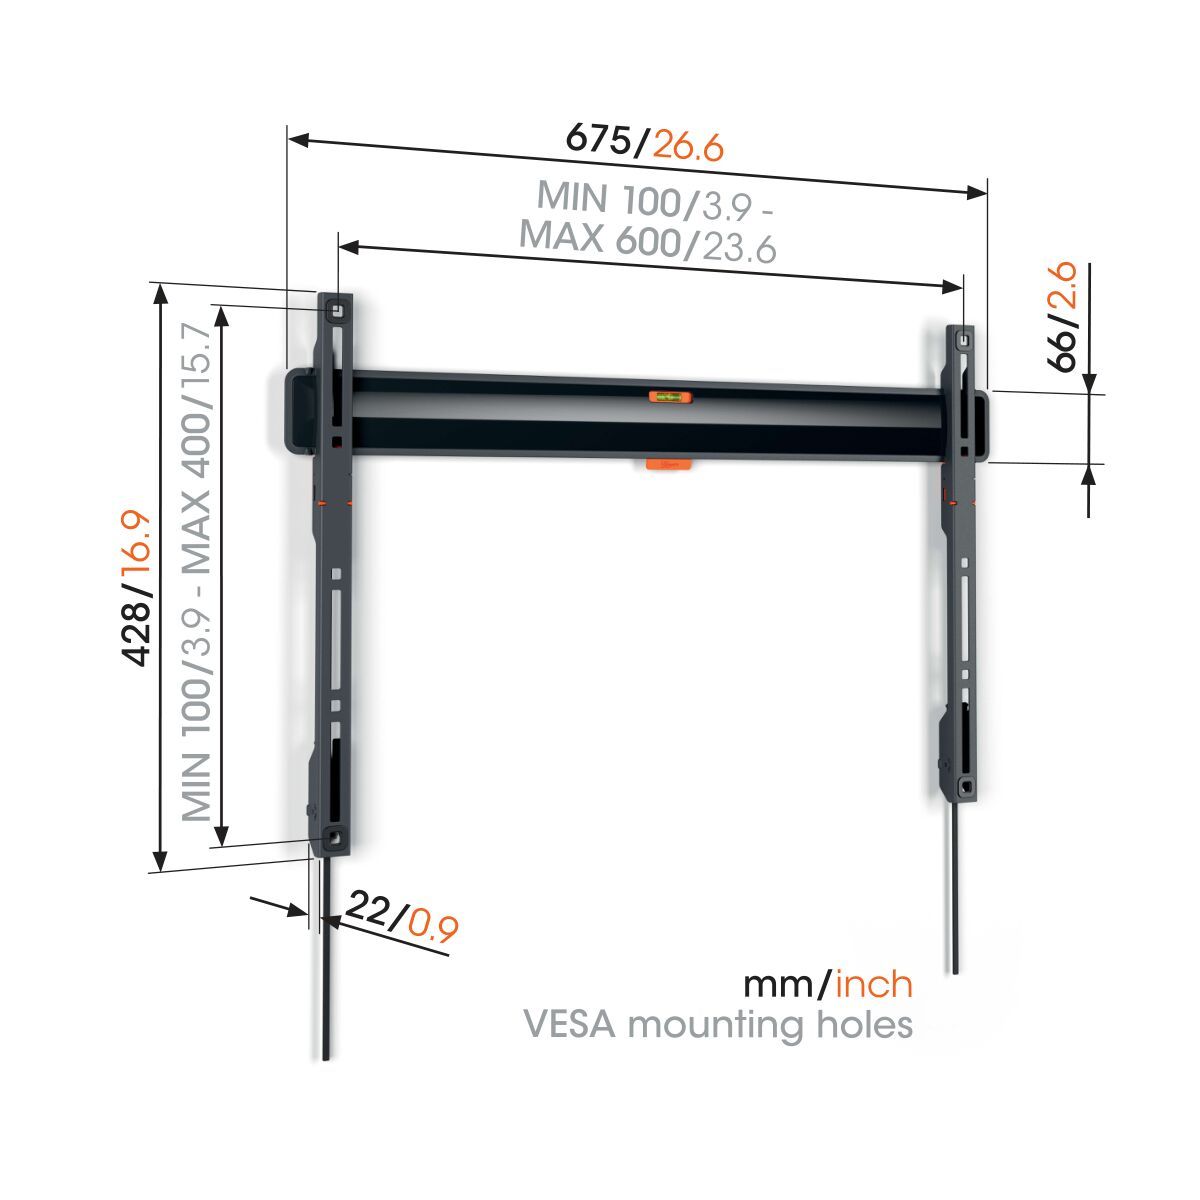 Vogel's TVM 3605 Fixed TV Wall Mount - Suitable for 40 up to 100 inch TVs - Dimensions